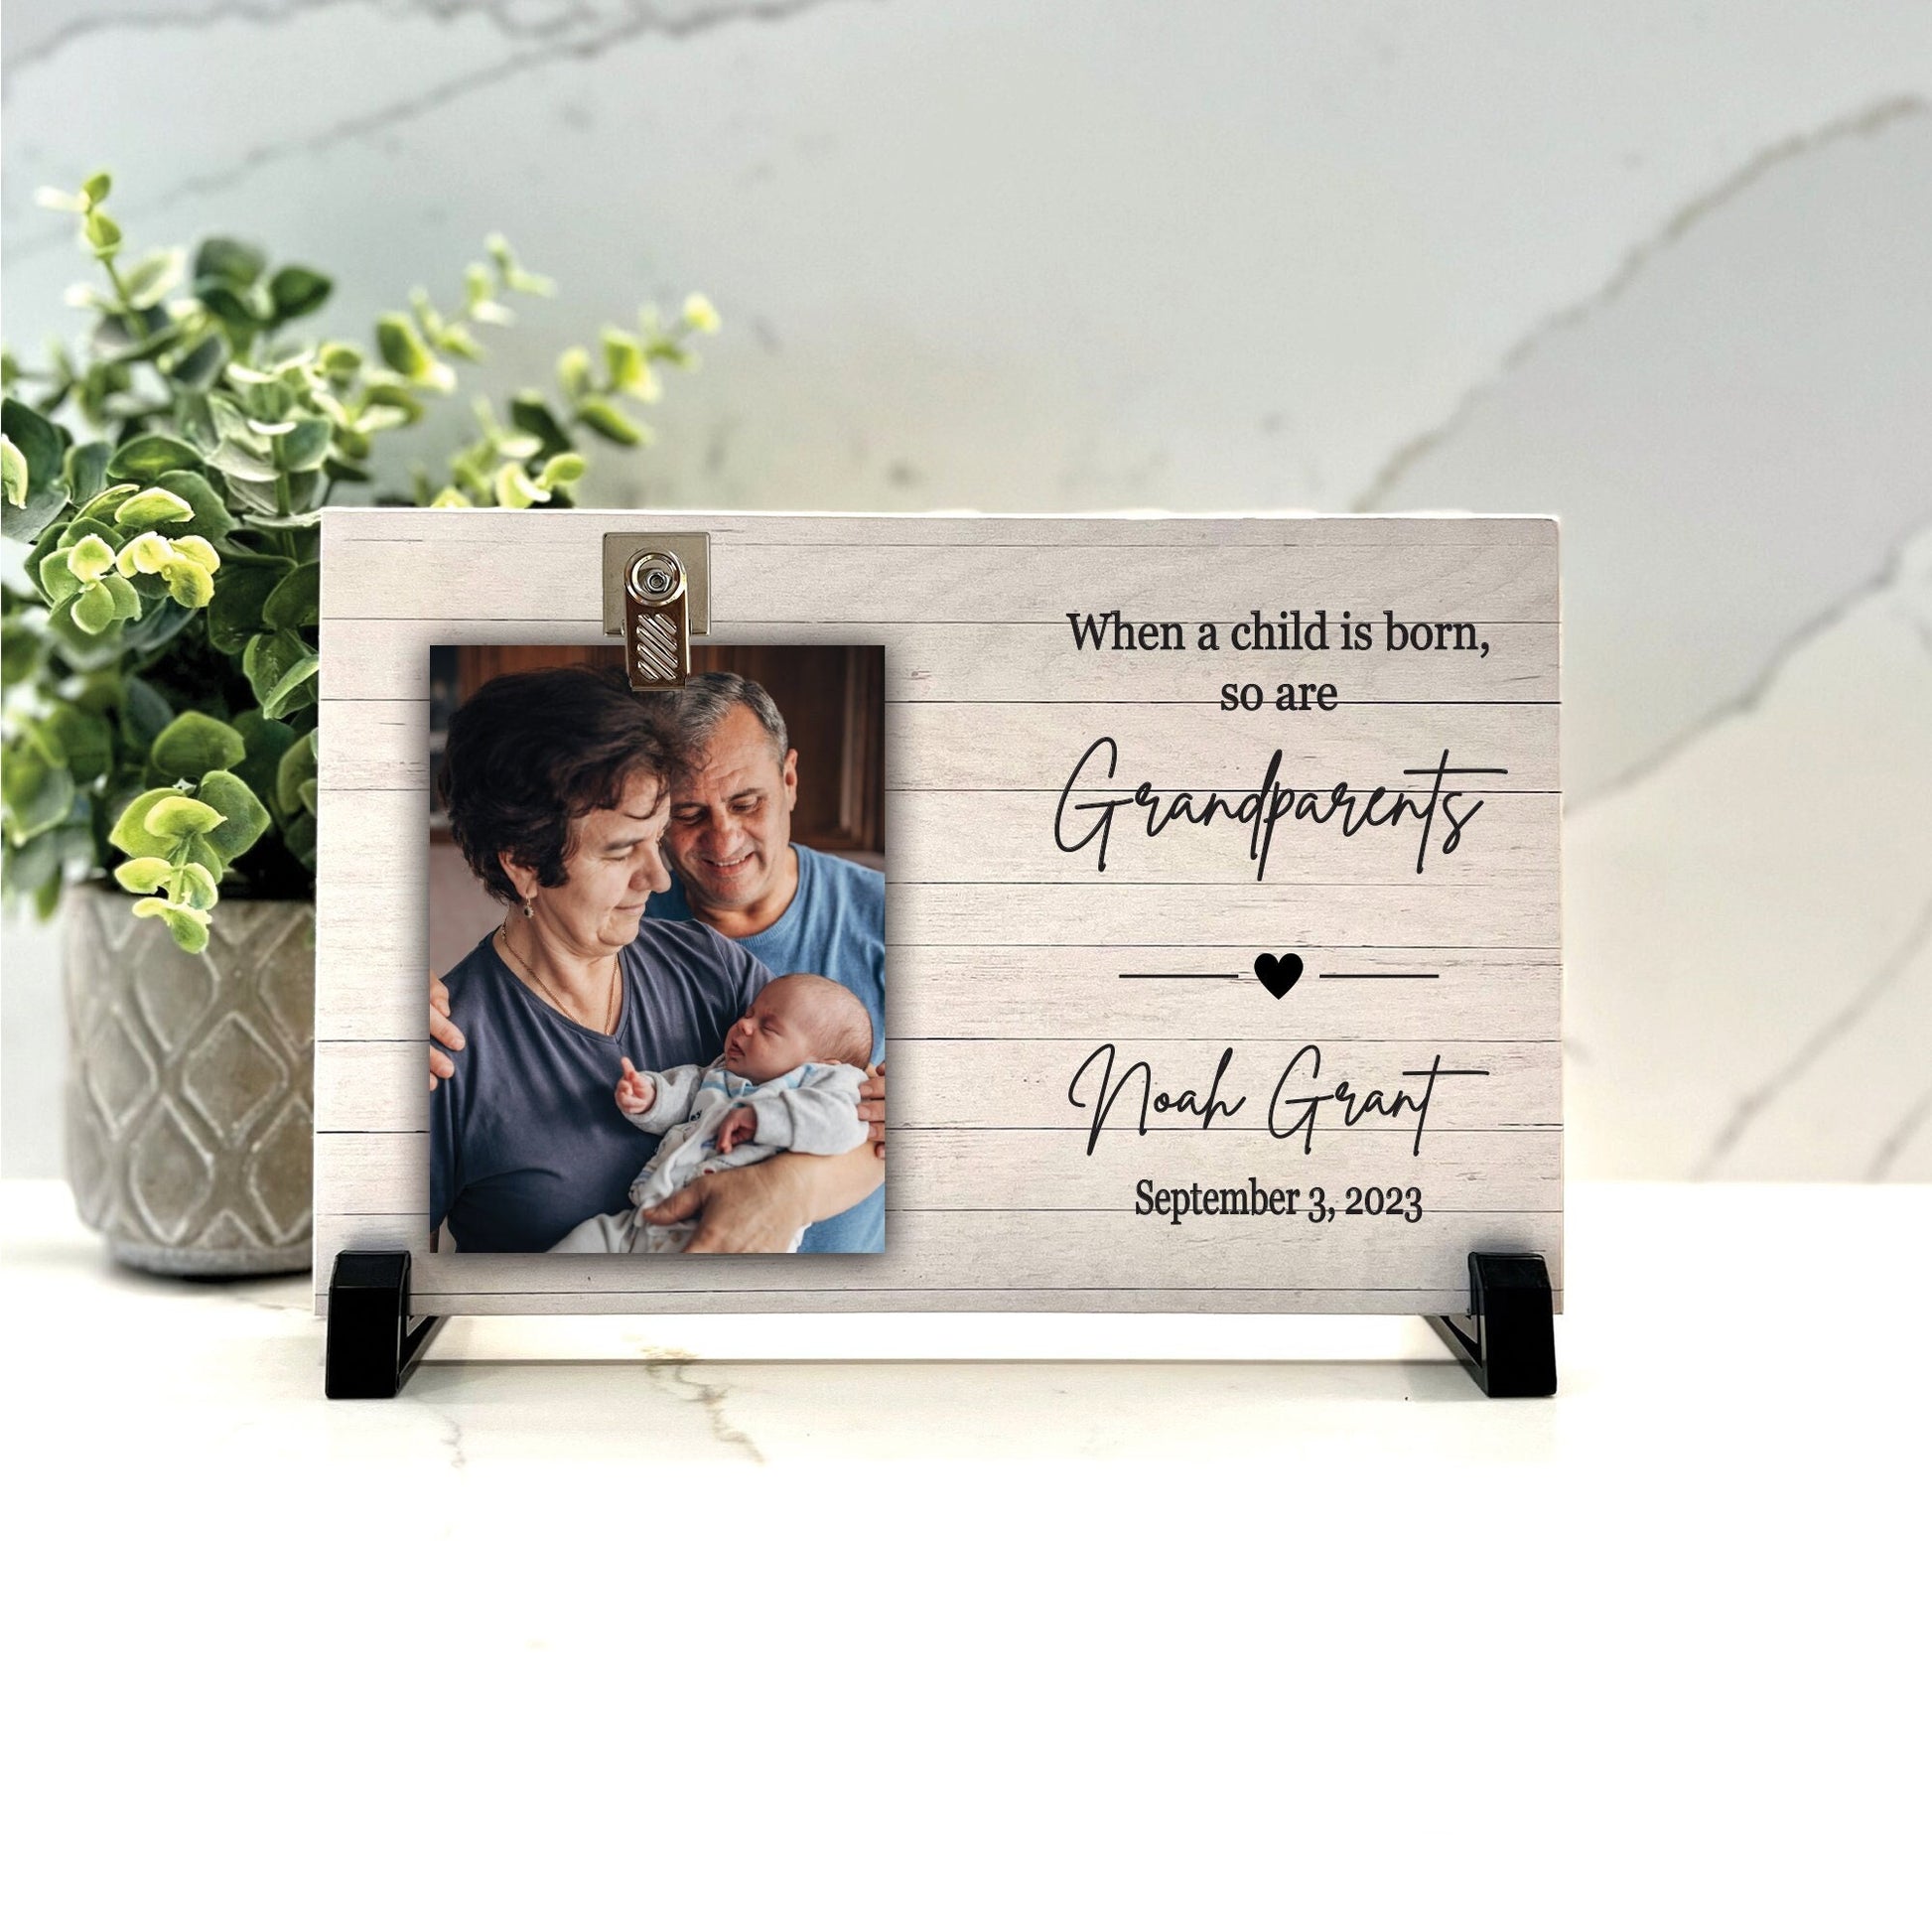 Customize your cherished moments with our Grandparent Personalized Picture Frame available at www.florida-funshine.com. Create a heartfelt gift for family and friends with free personalization, quick shipping in 1-2 business days, and quality crafted picture frames, portraits, and plaques made in the USA."